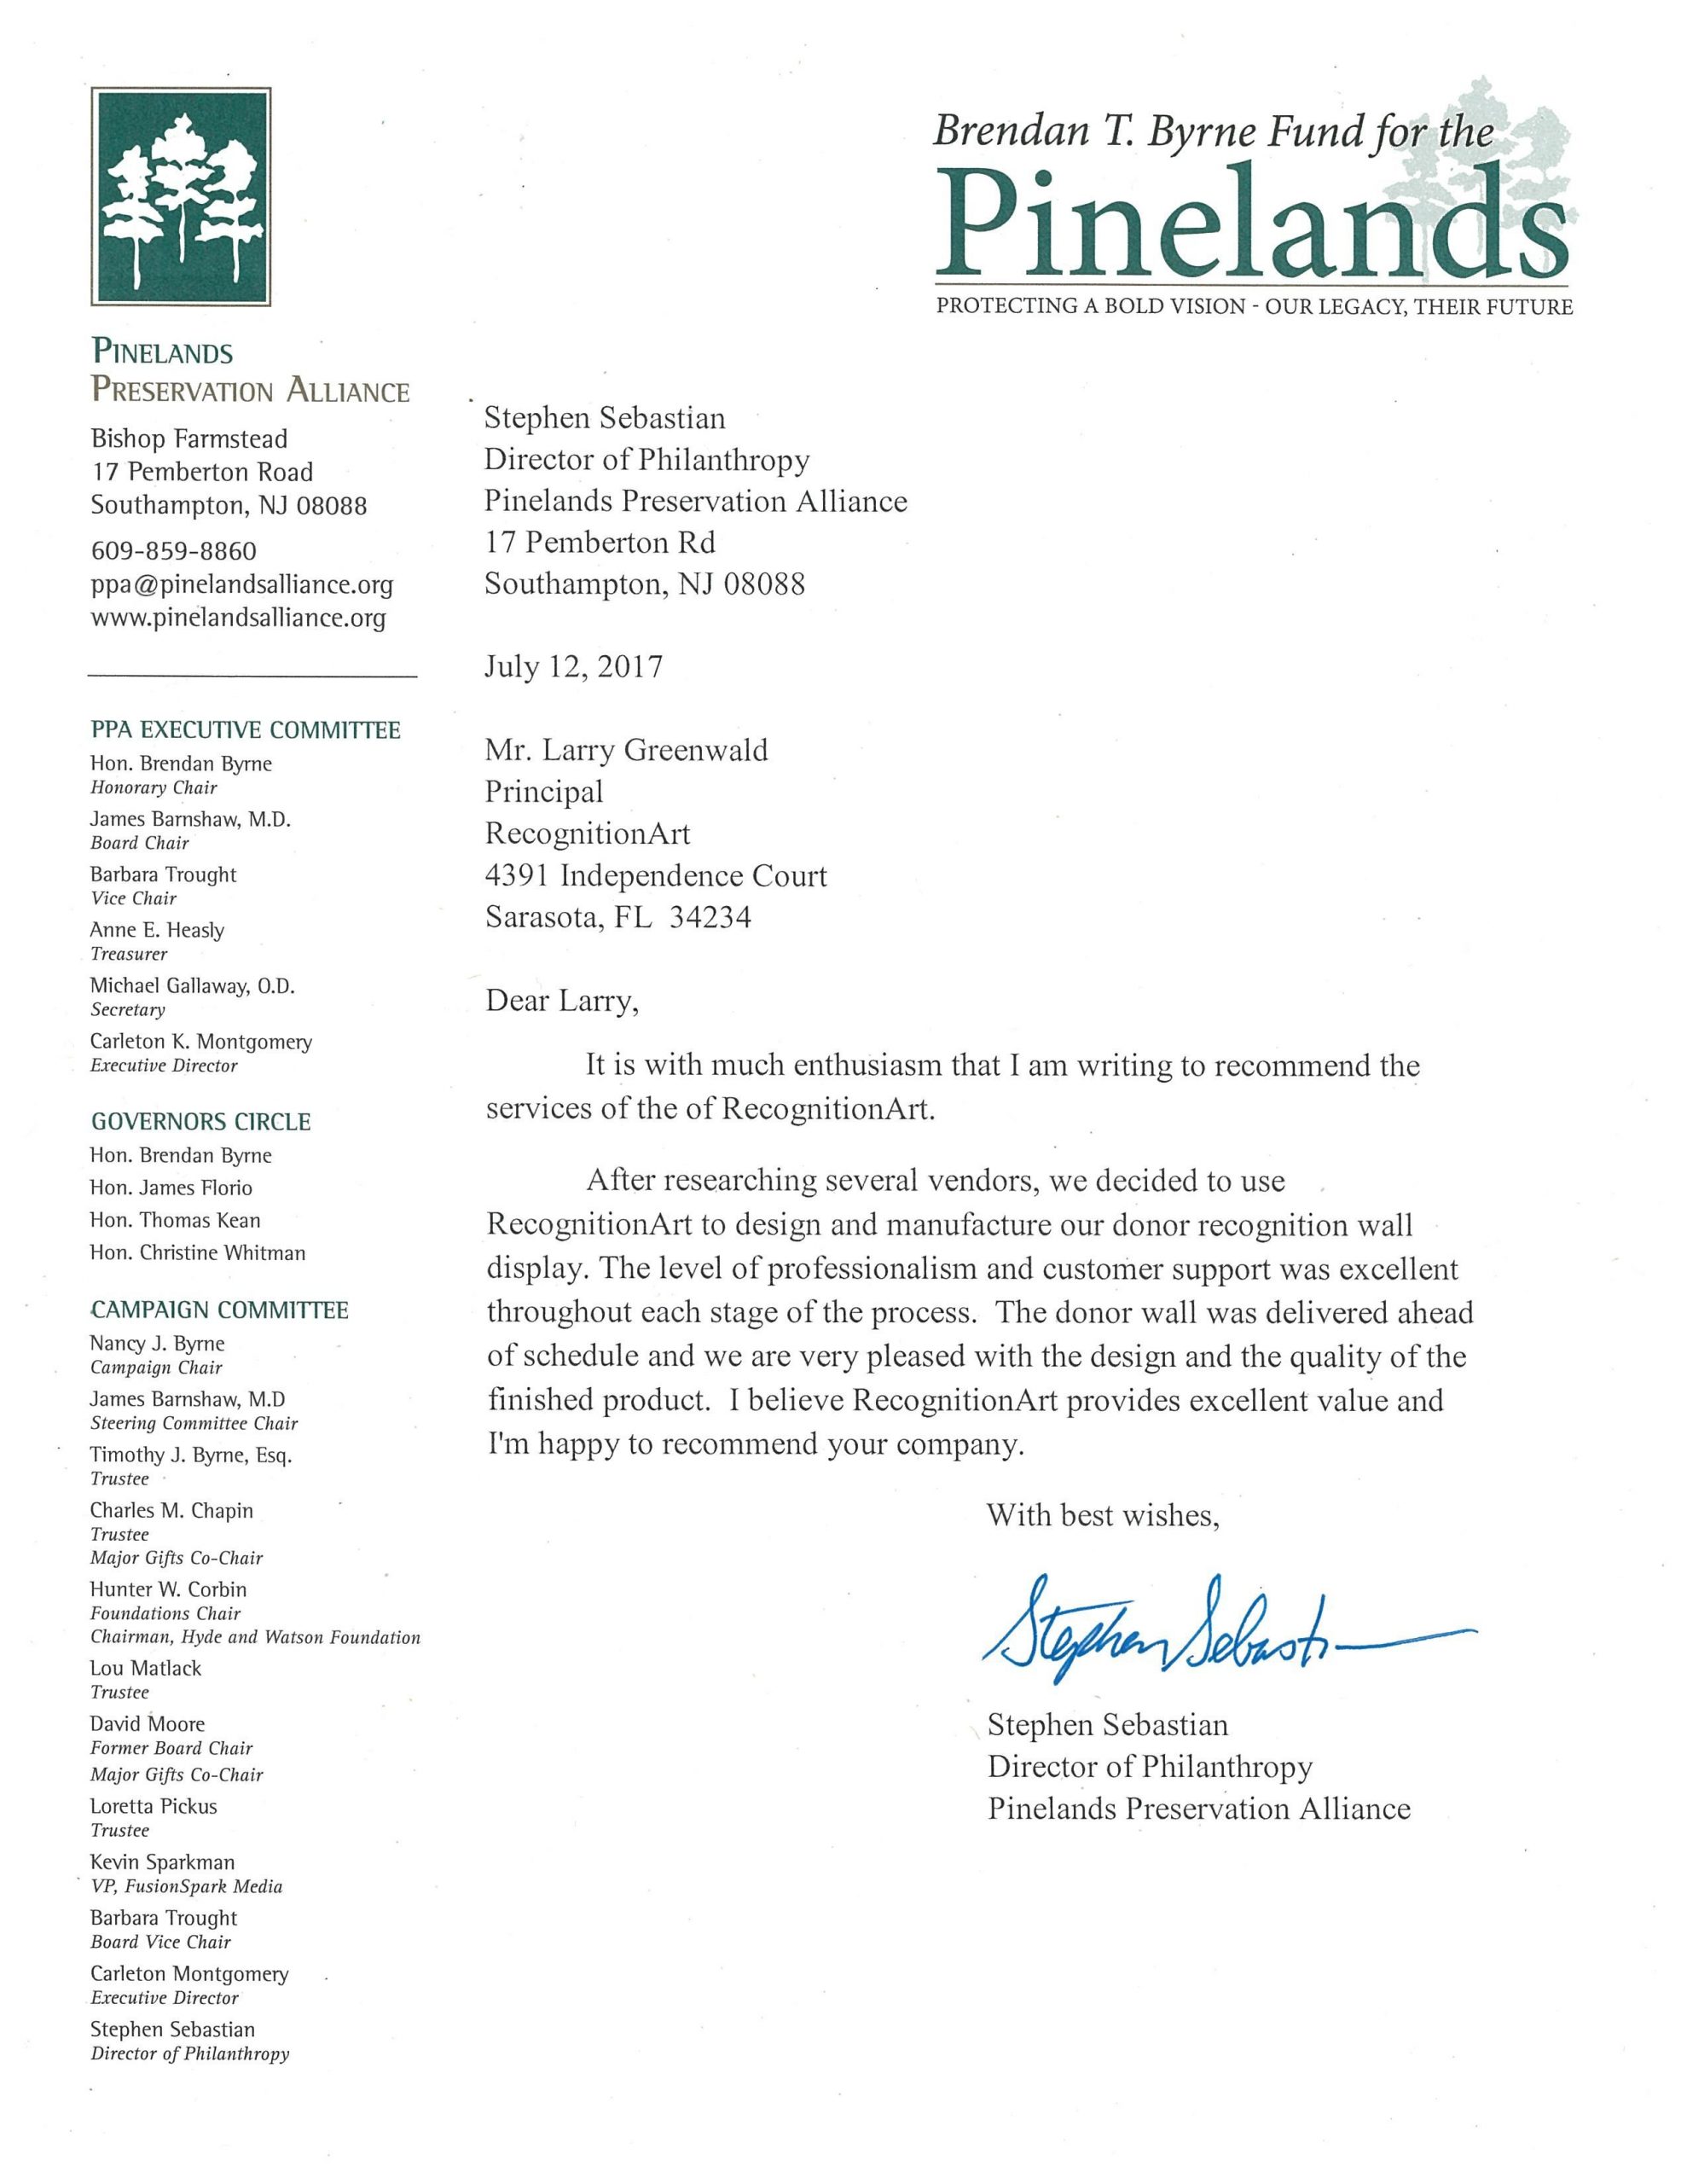 Letter Of Recommendation Pinelands Donordisplay intended for size 2550 X 3300